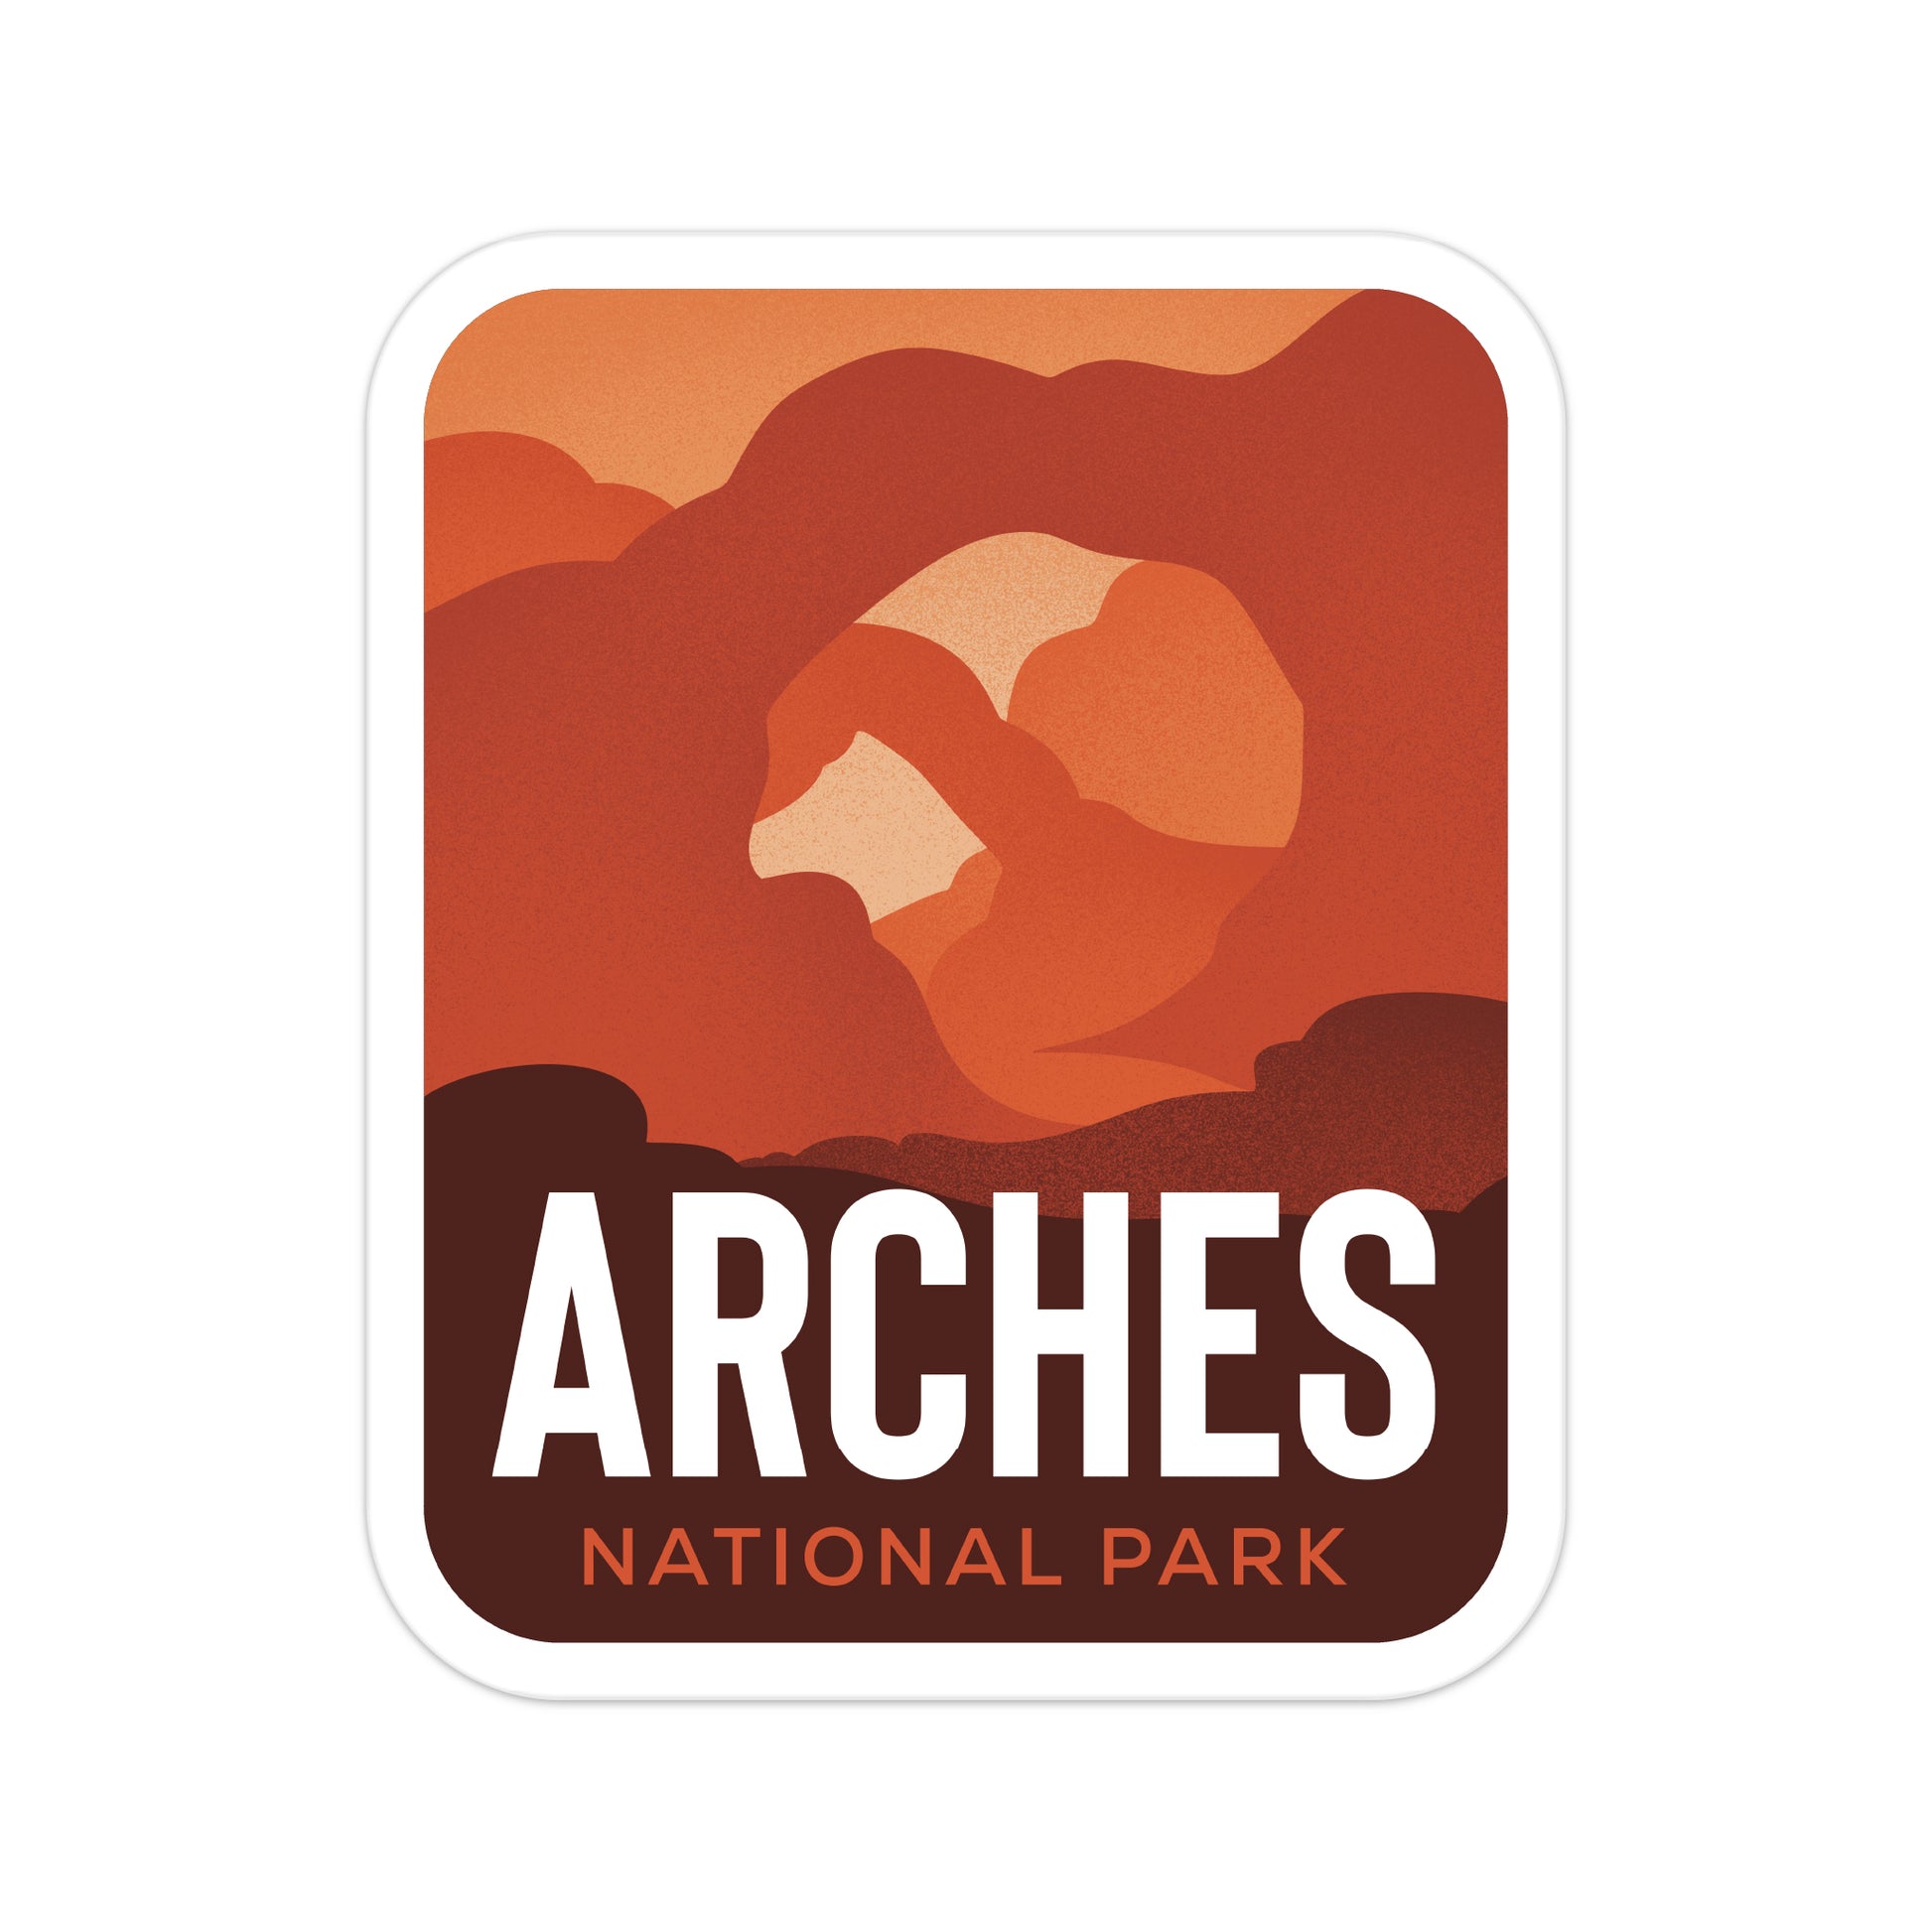 A sticker of Arches National Park